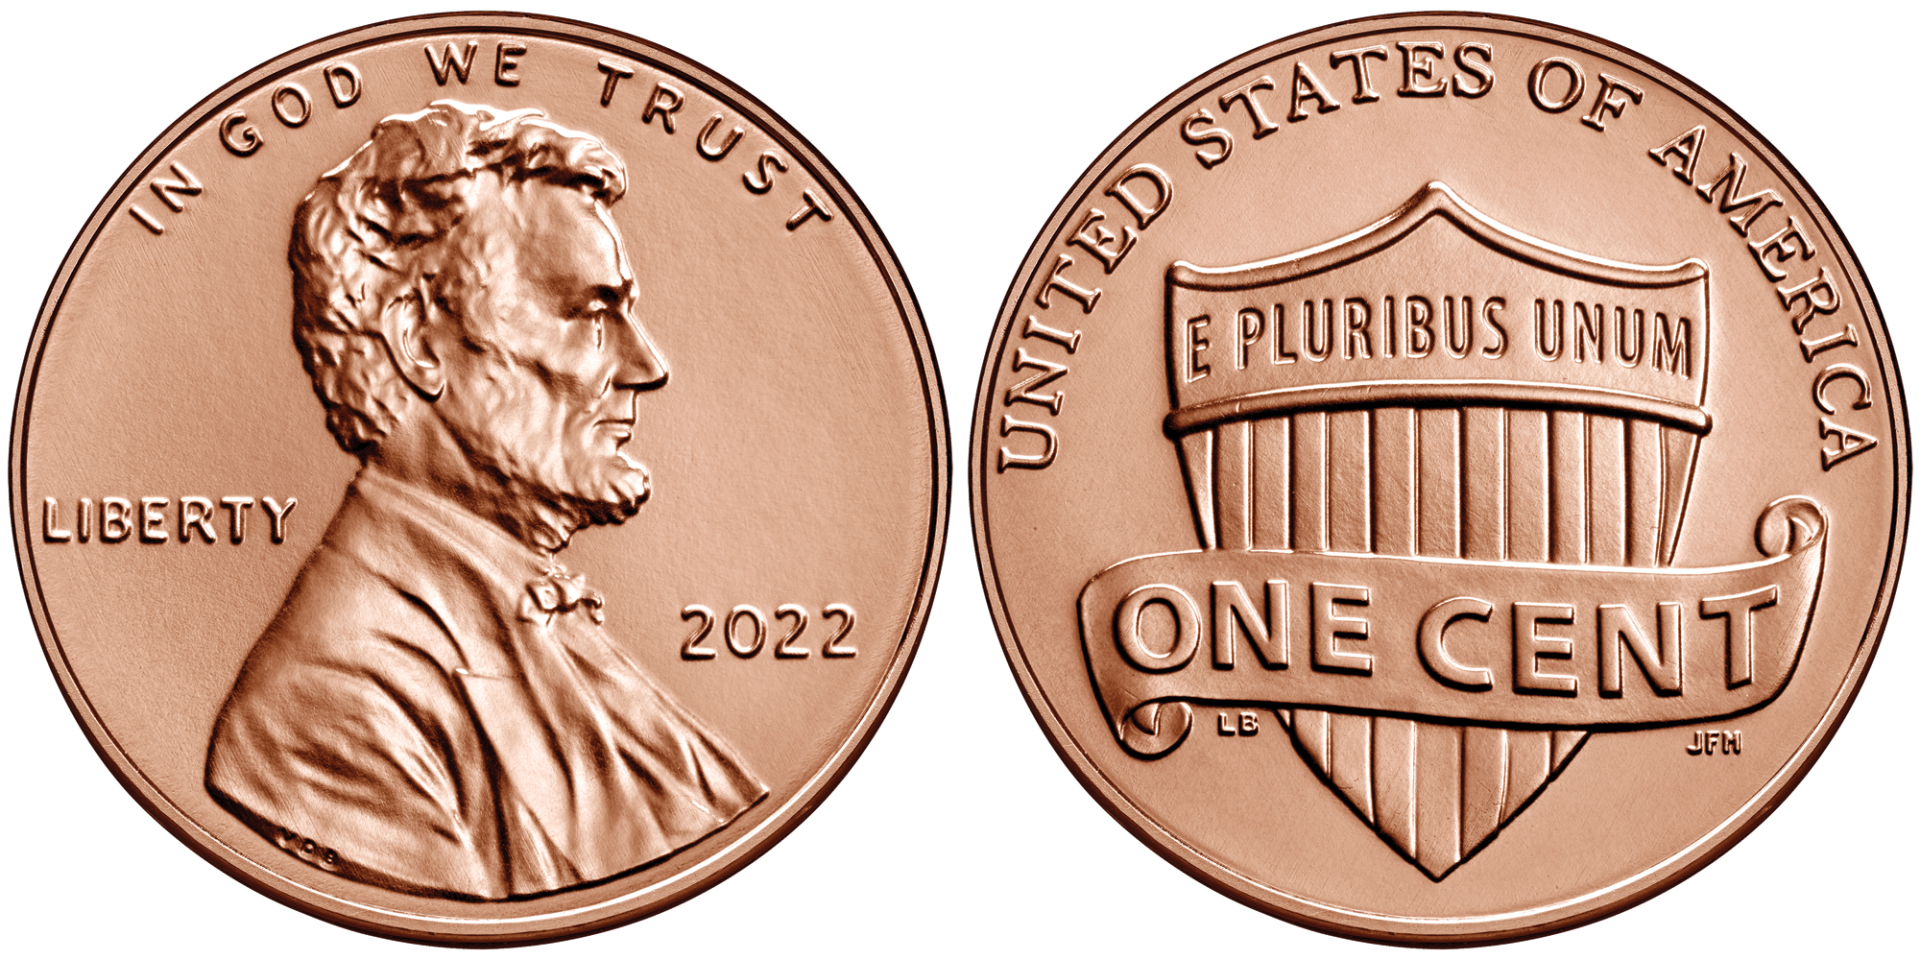 The obverse and reverse of a U.S. One Cent